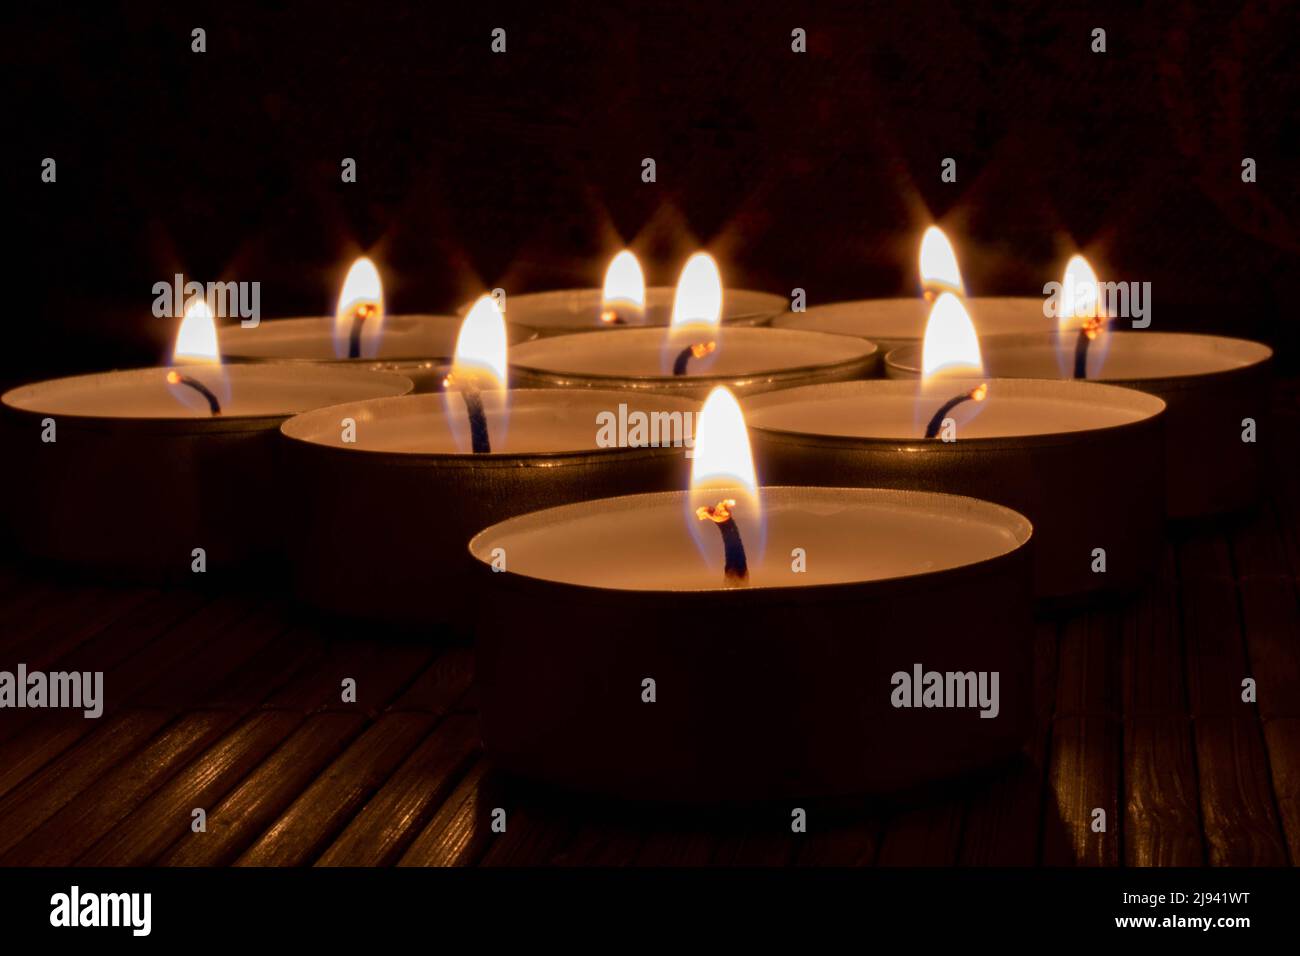 Close-up of illuminated candles on wooden table. concept for condolence, hope, romance Stock Photo